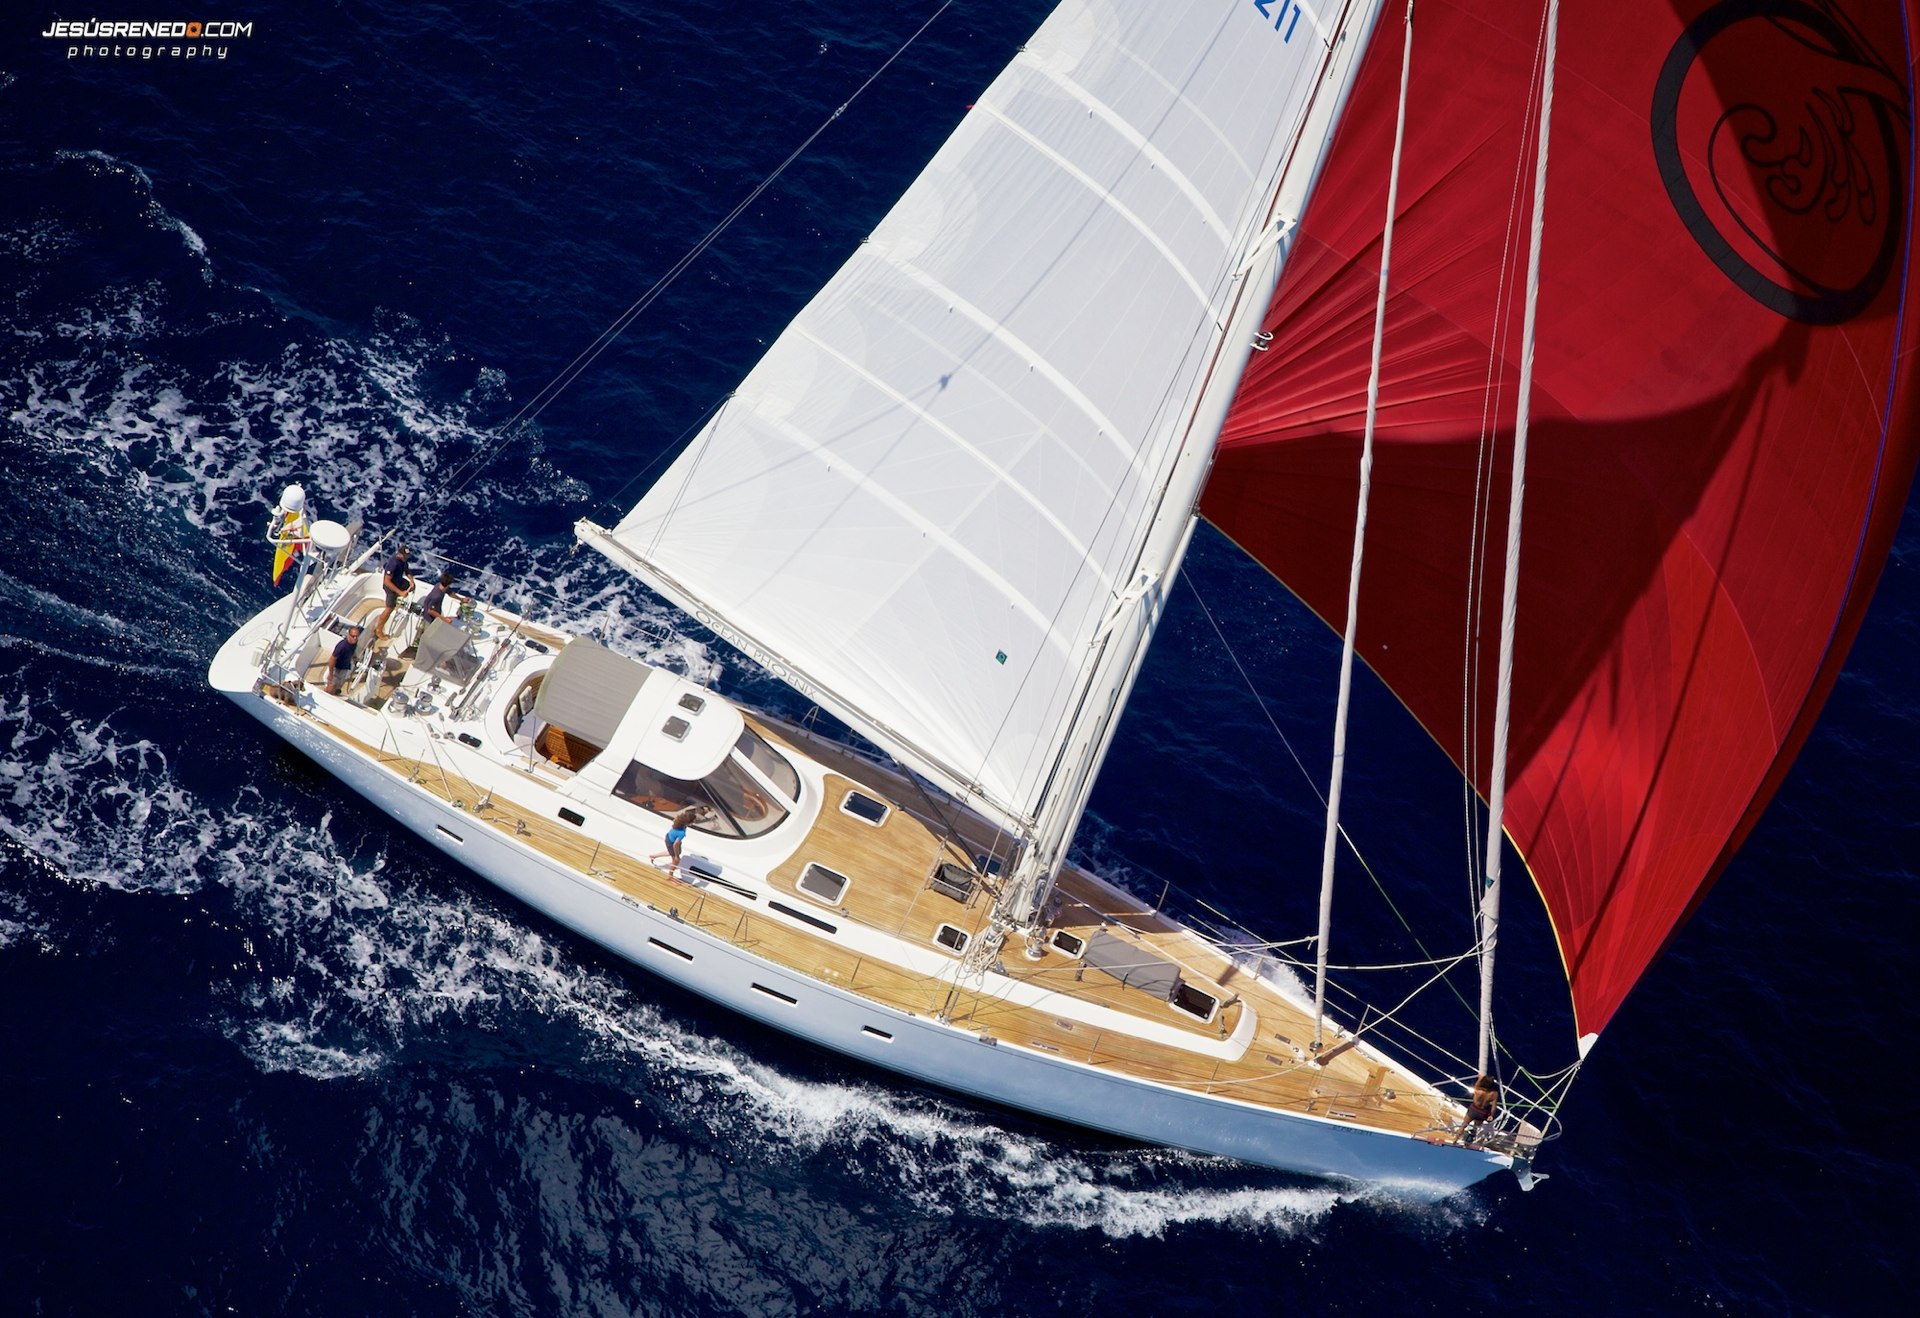 Sail boat FOR CHARTER, year 1996 brand Pendennis and model 77, available in MARTINIQUE  Fort-de-France Martinica